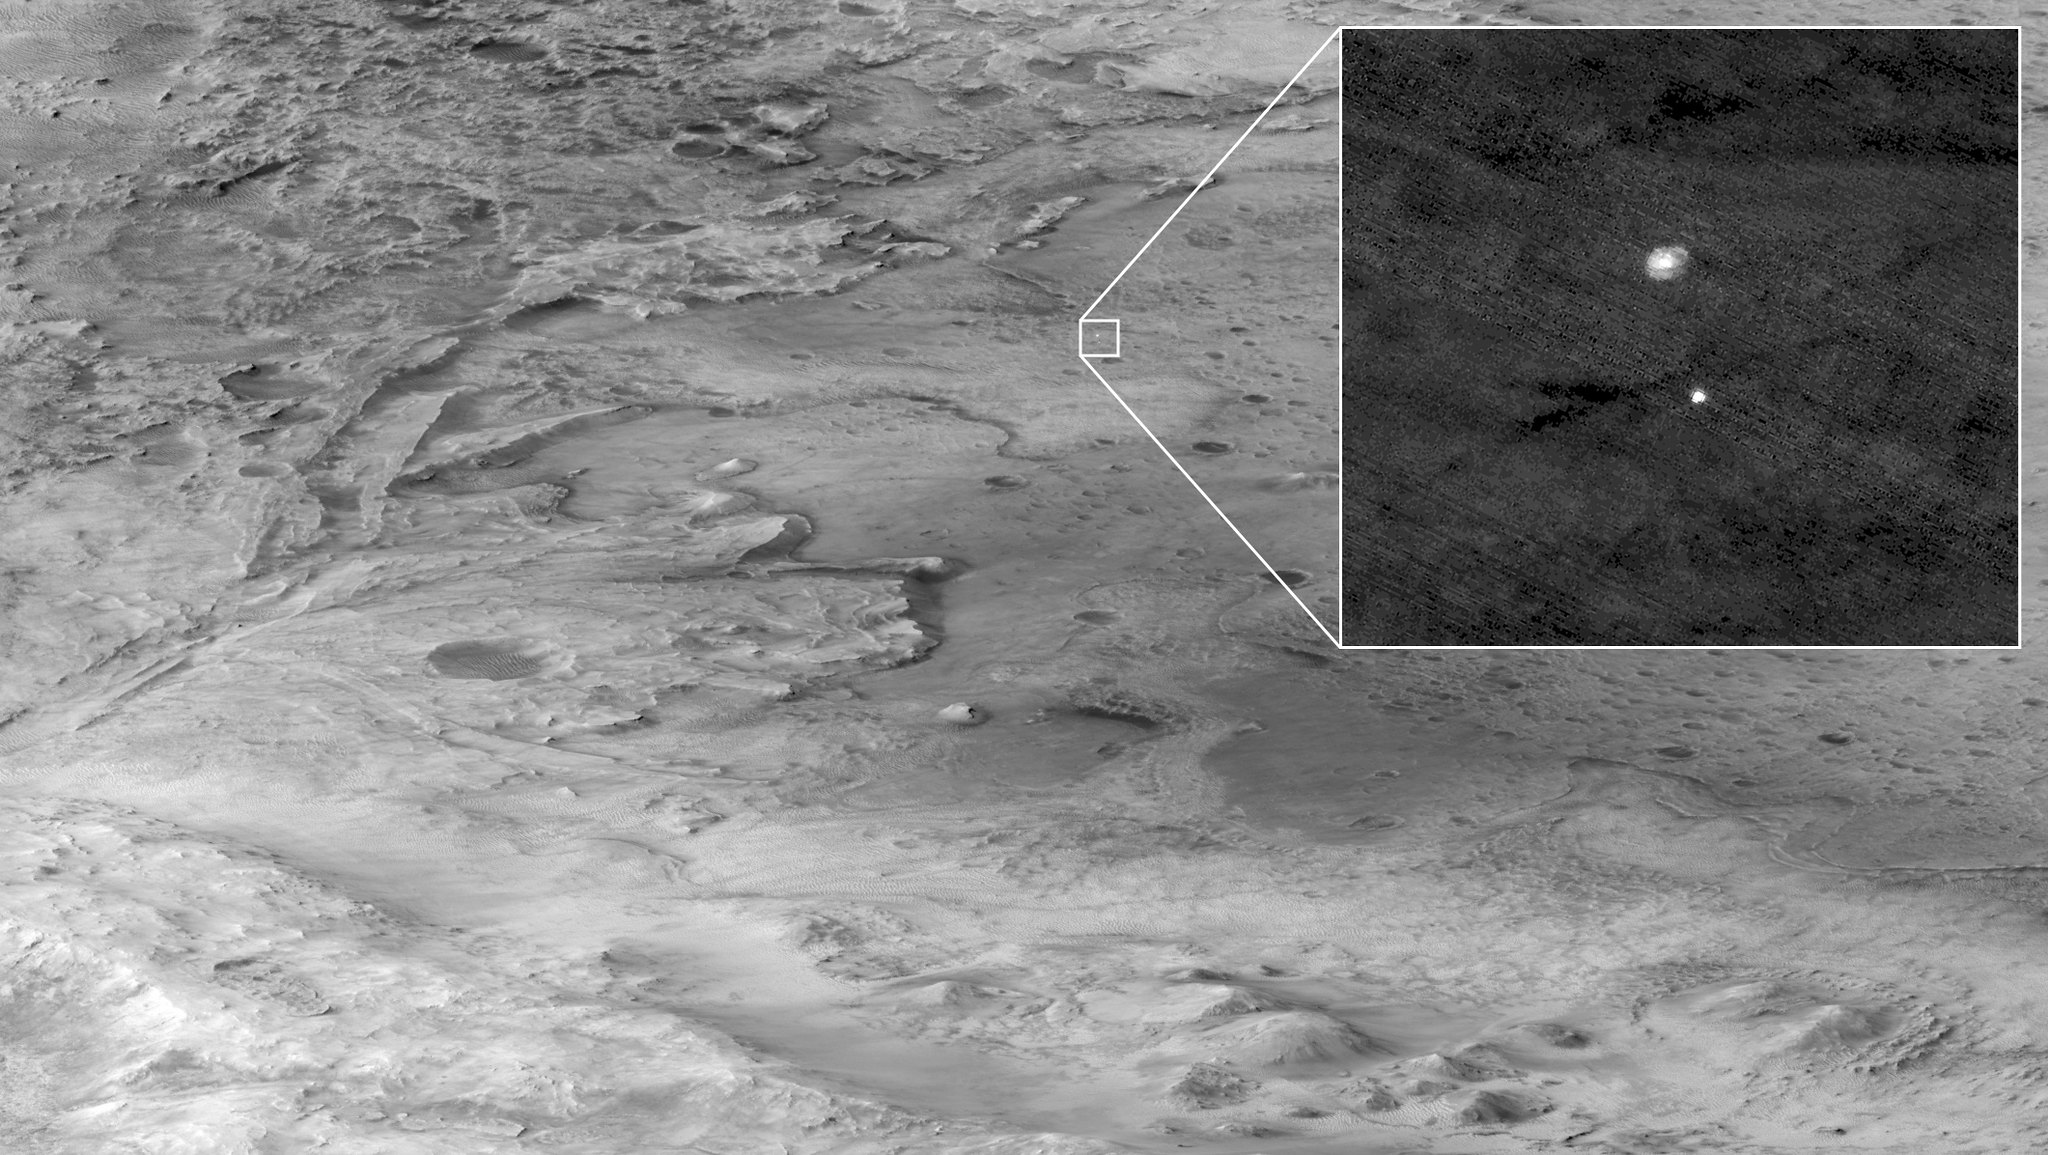 The Mars 2020 descent stage holding NASA’s Perseverance rover can be seen falling through the Martian atmosphere by the Mars Reconnaissance Orbiter’s HiRise camera, its parachute trailing behind, in this image taken on 18 February 2021. The ancient river delta, which is the target of the Perseverance mission, can be seen entering Jezero Crater from the left.